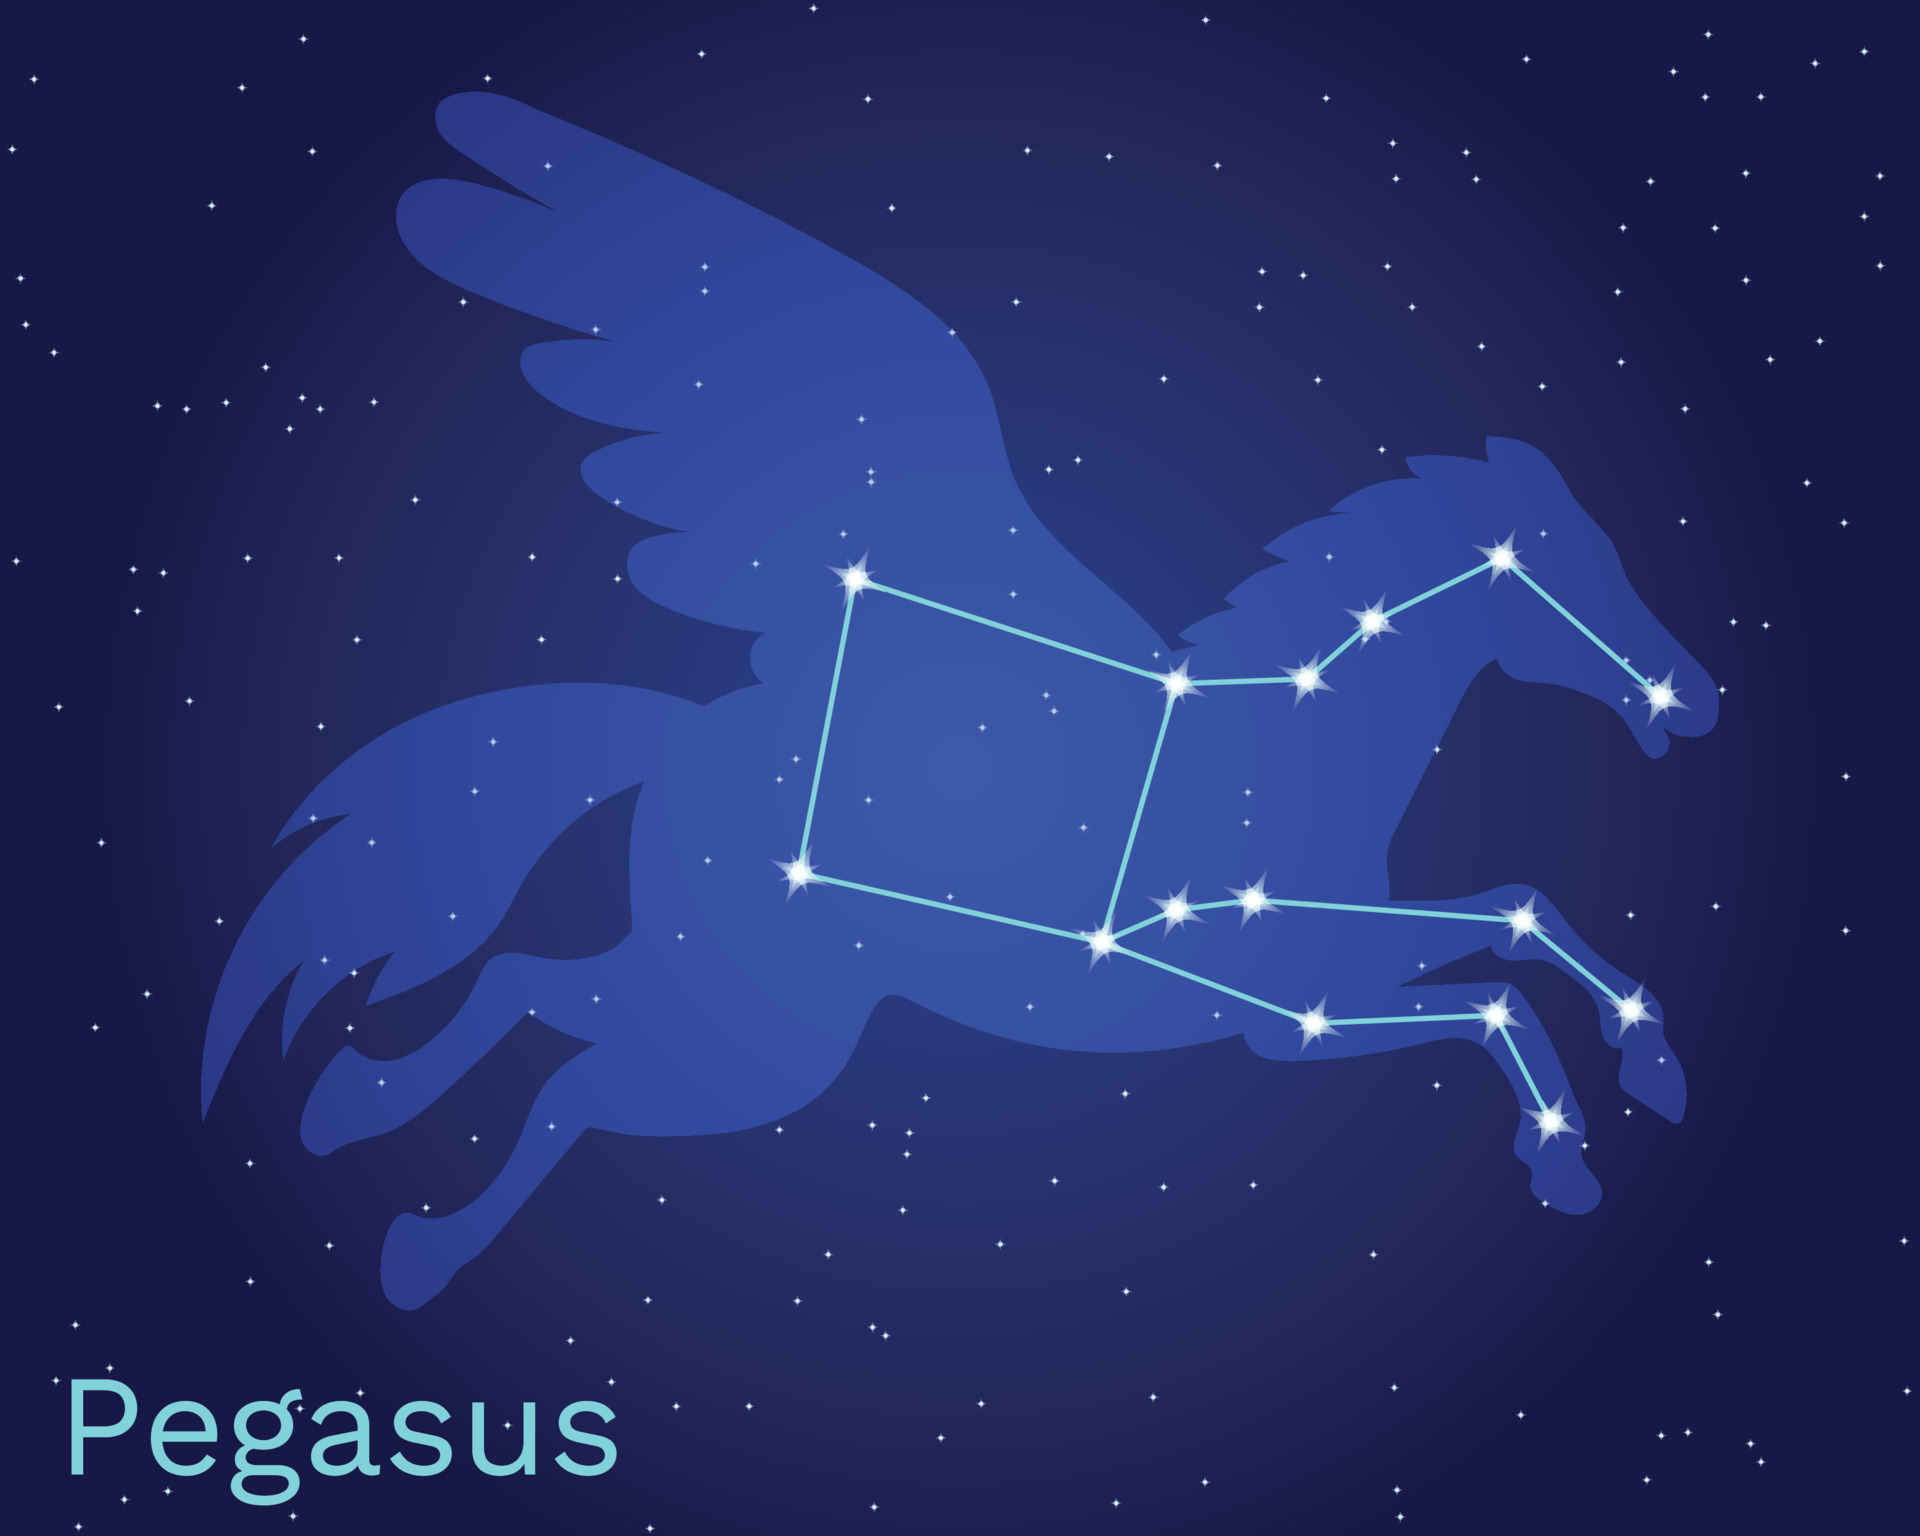 Alien Pegataur Illustration-depicting-the-pegasus-constellation-winged-horse-from-greek-mythology-starry-sky-the-constellation-of-the-northern-hemisphere-of-the-starry-sky-greek-mythology-vector